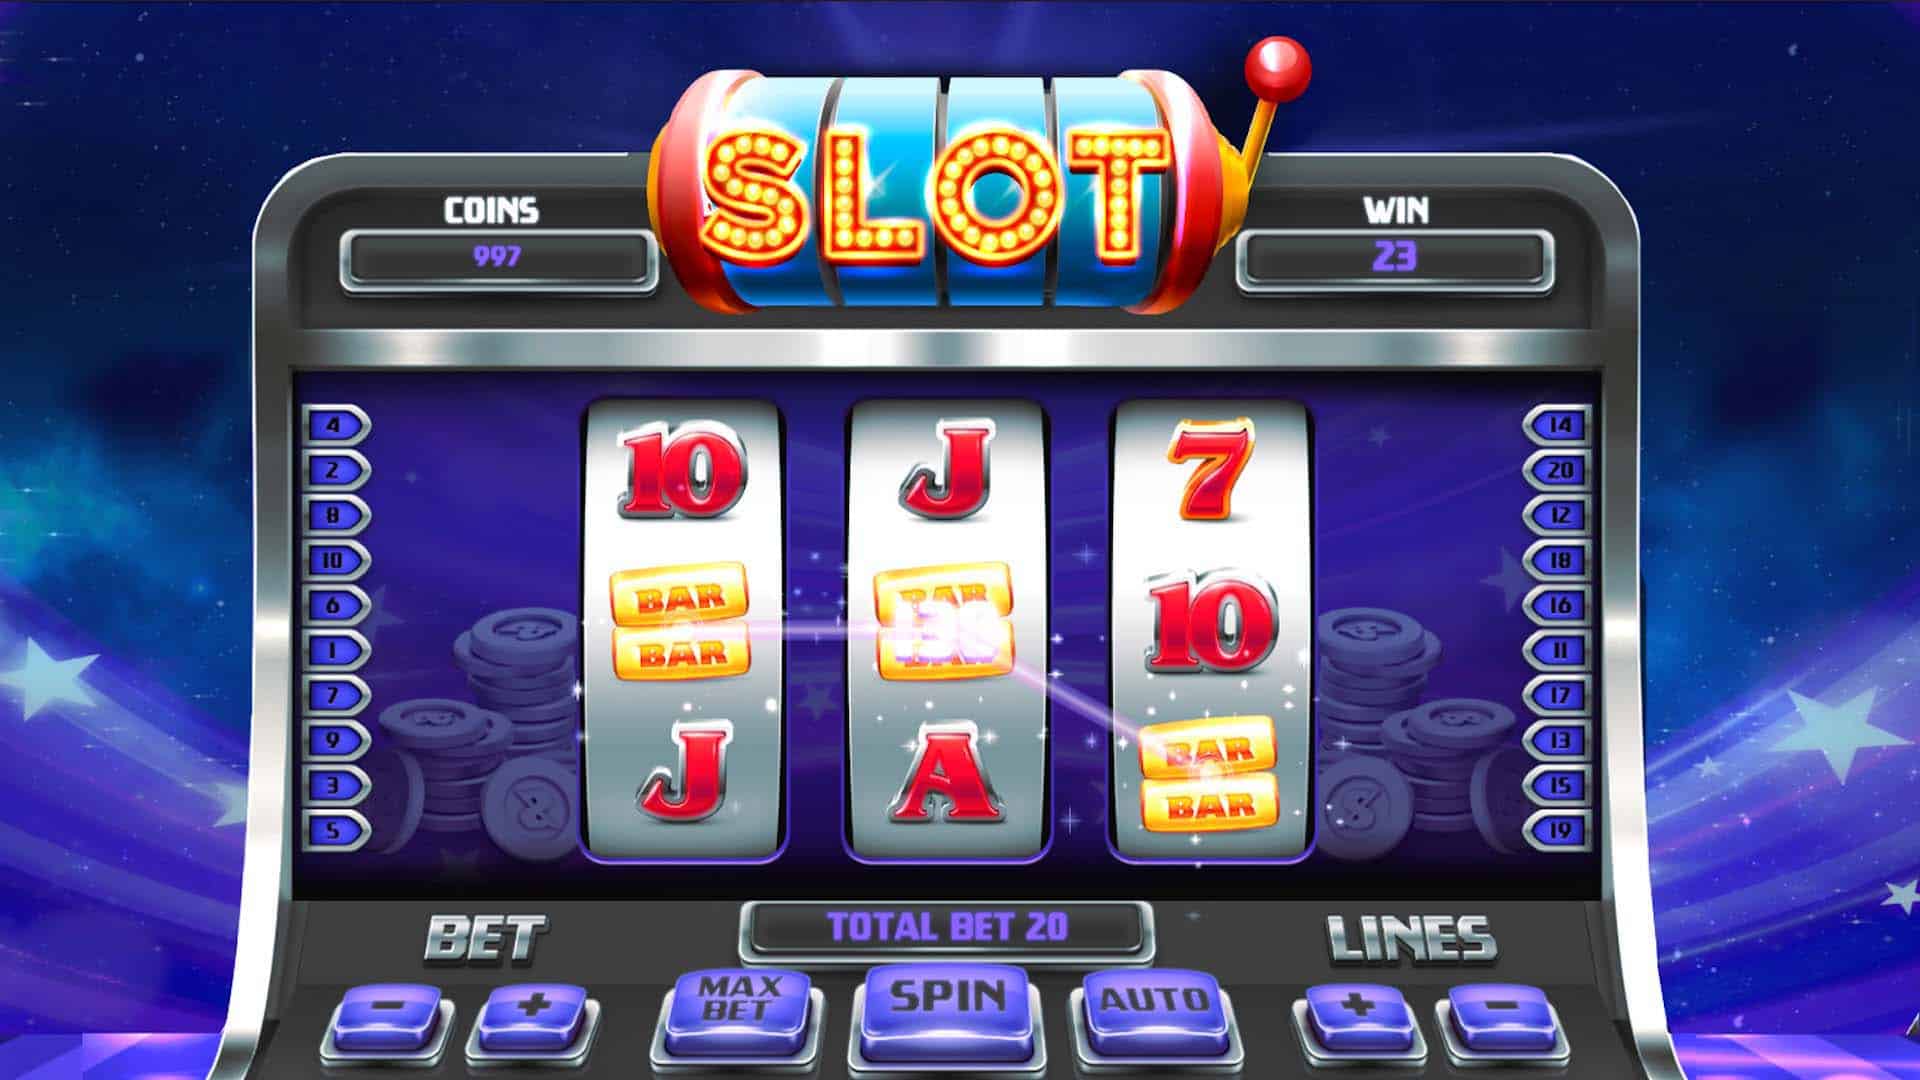 Have a good slot pragmatic time online